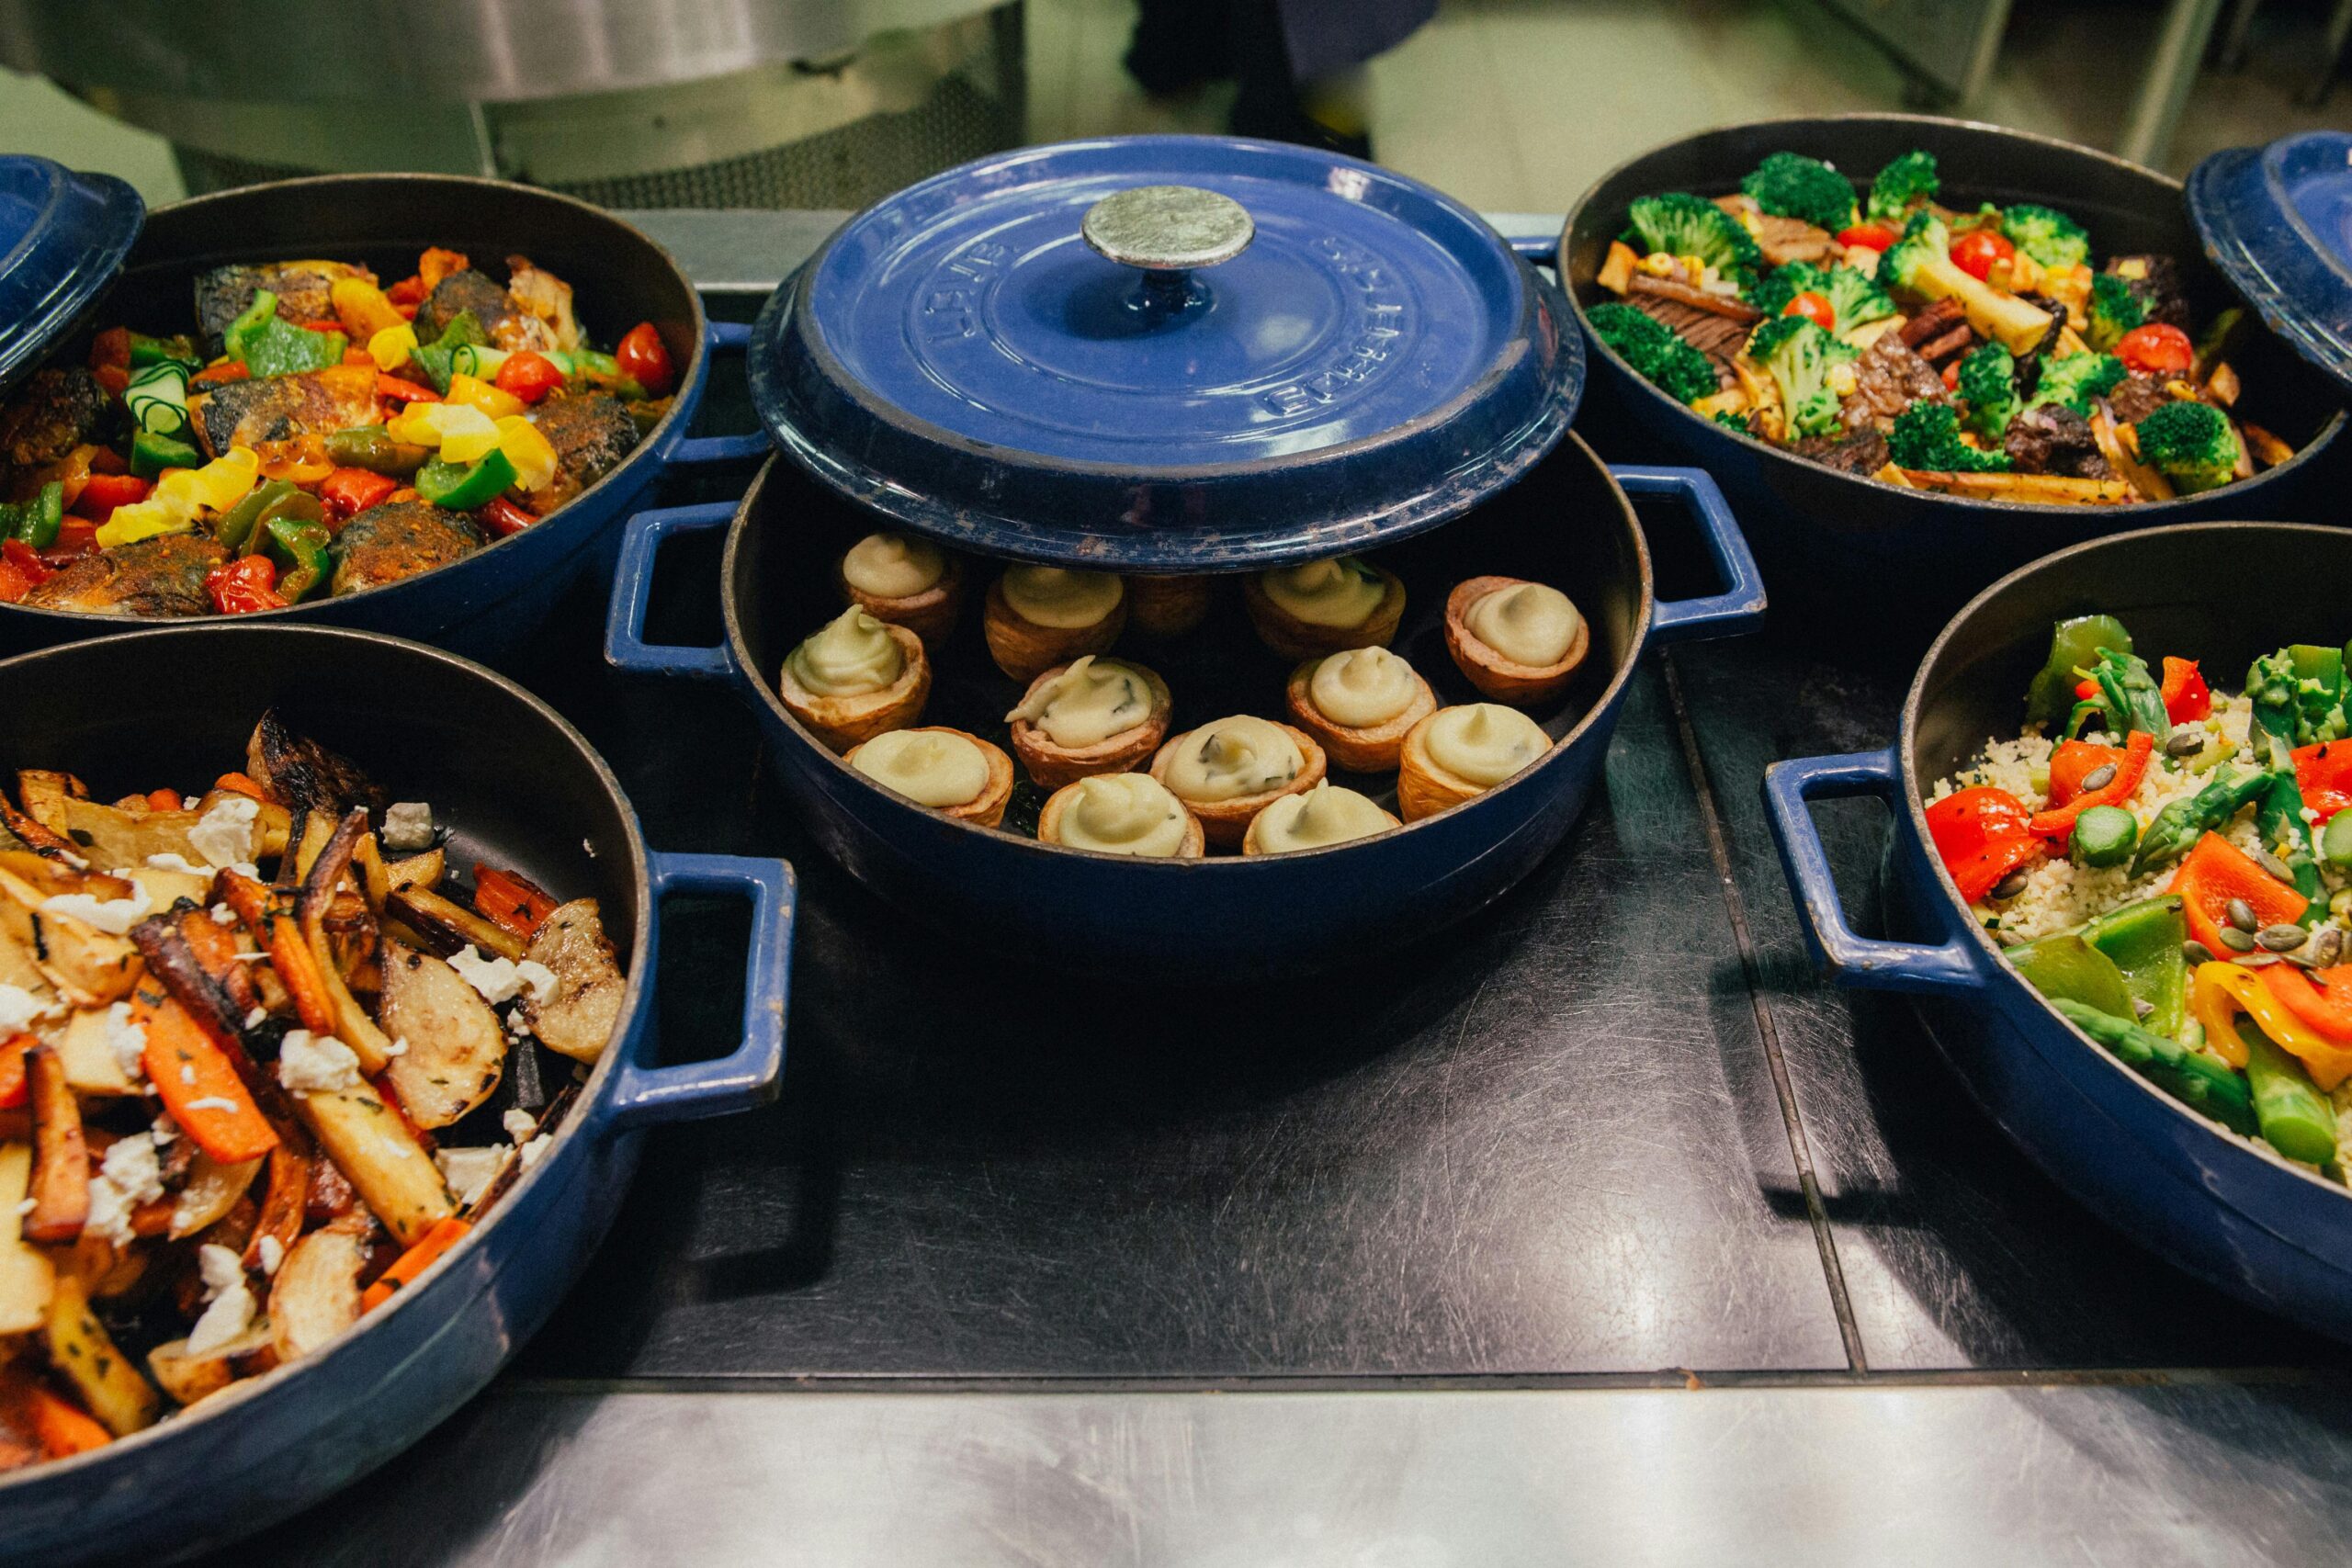 Pots of food at the serving pass